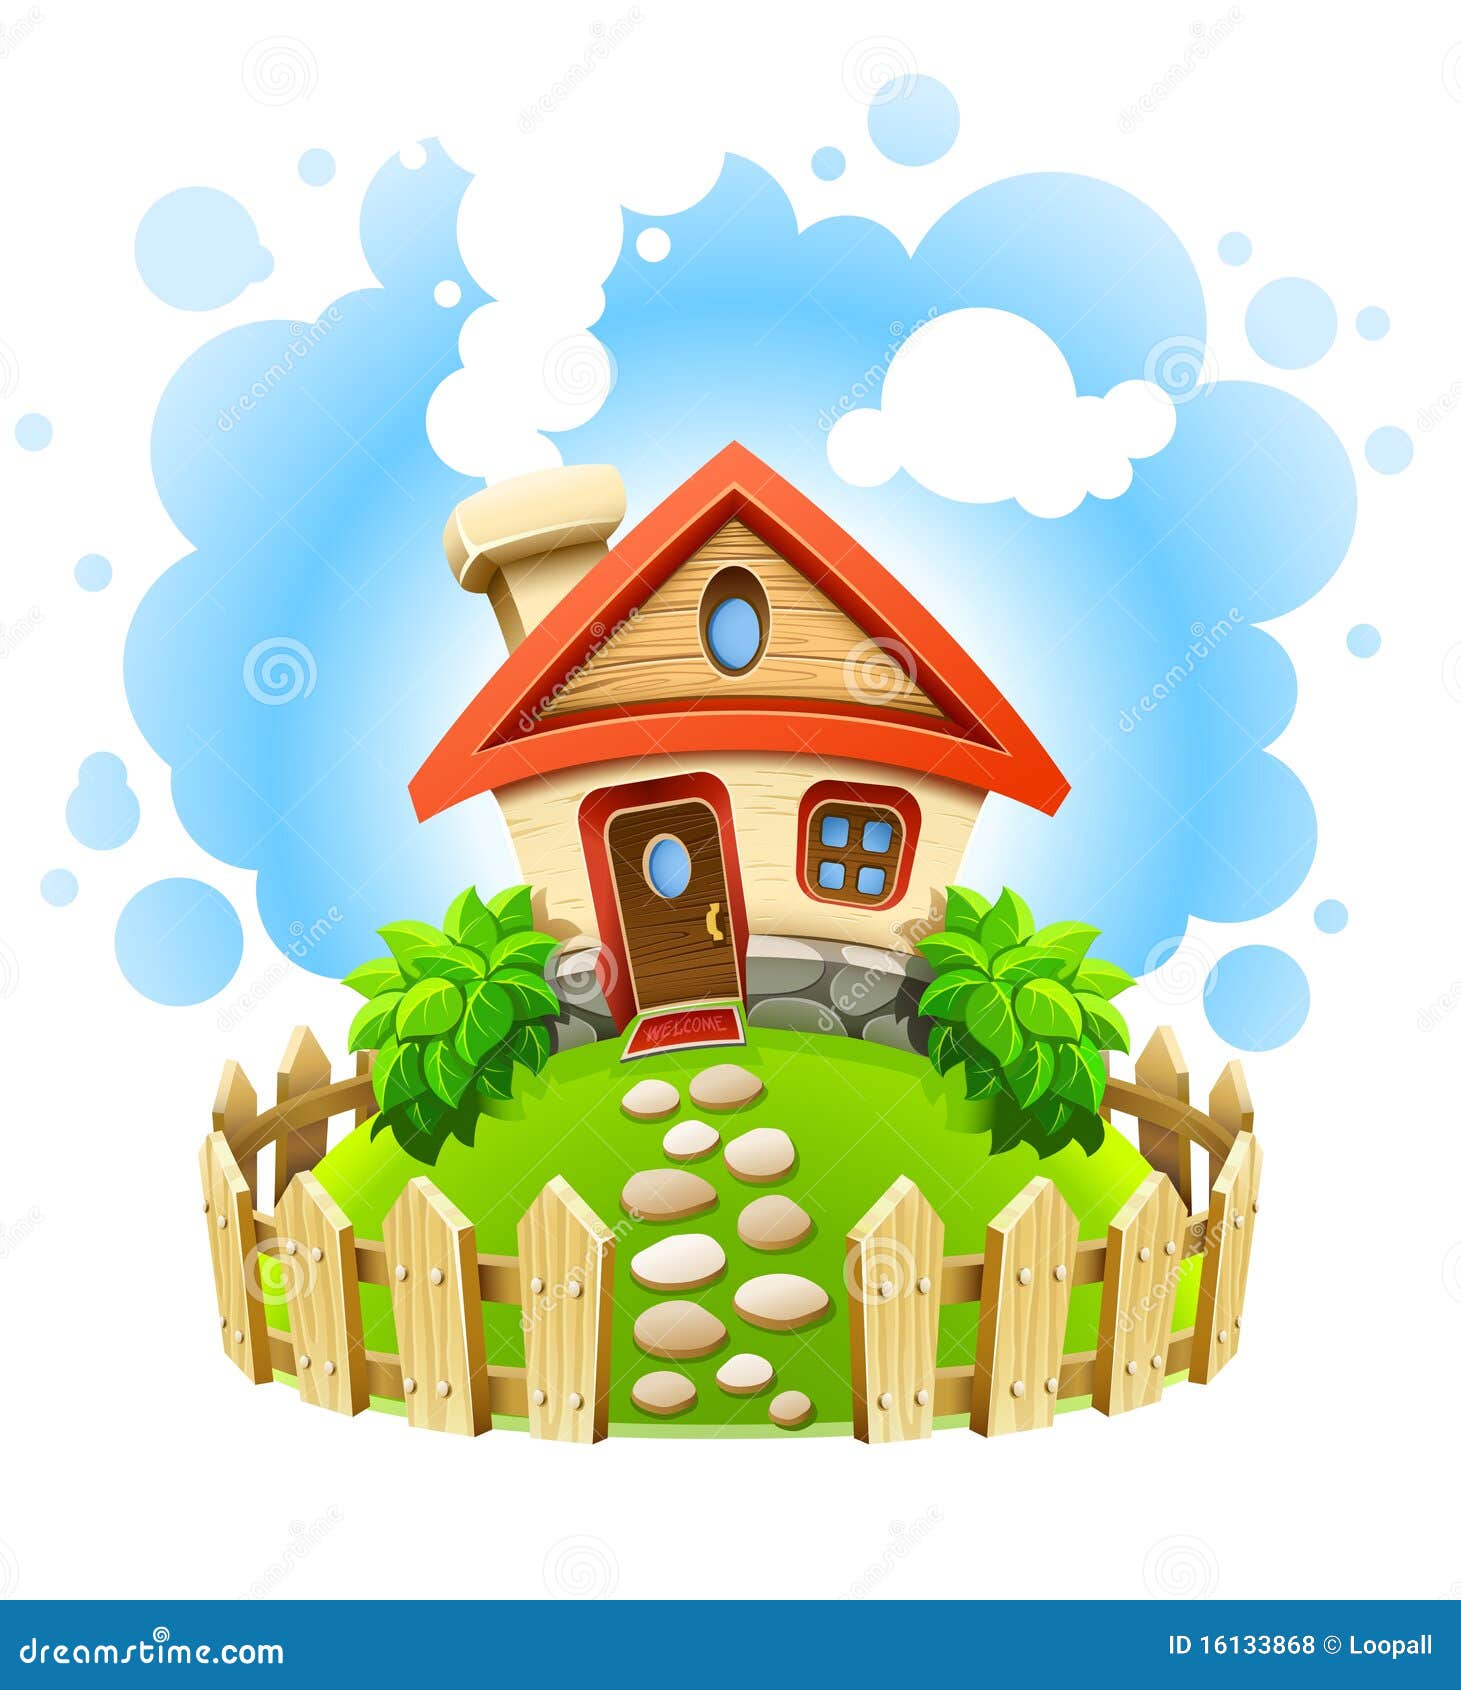 house with fence clip art - photo #28